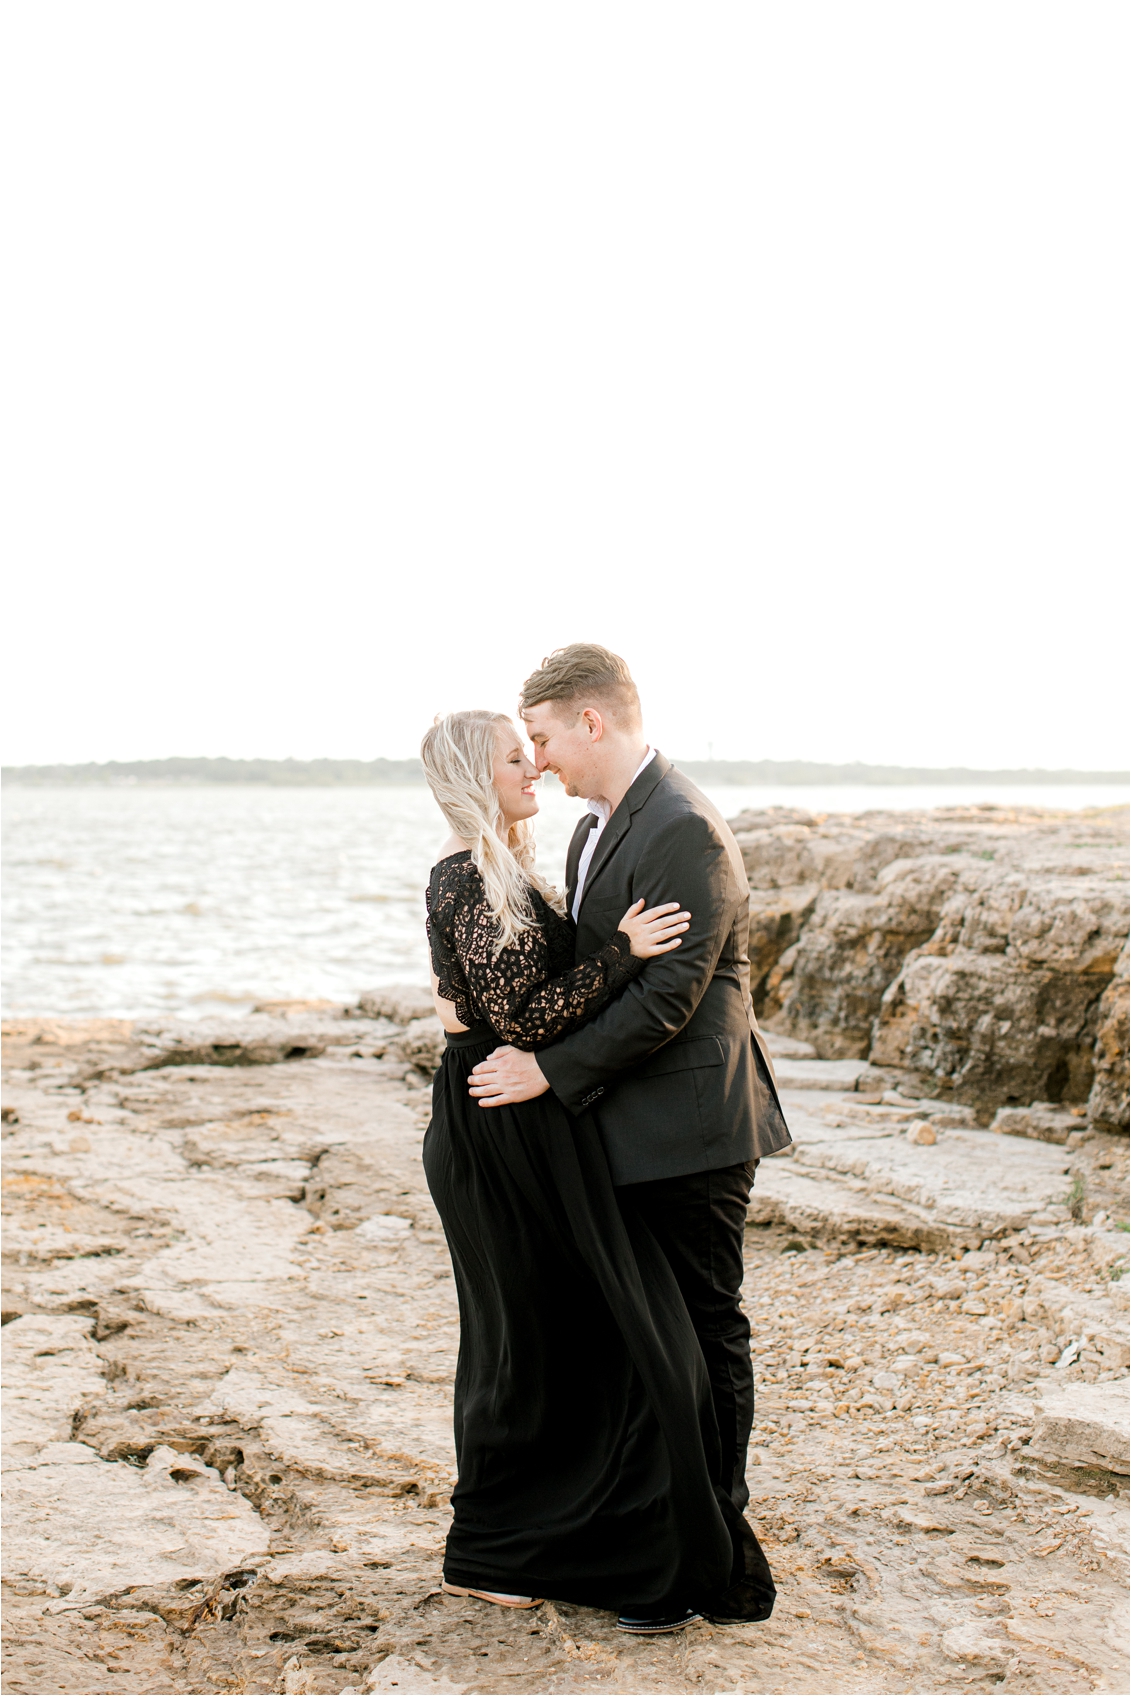 Rockledge Park Engagement Session by DFW Wedding Photographer Gaby Caskey Photography